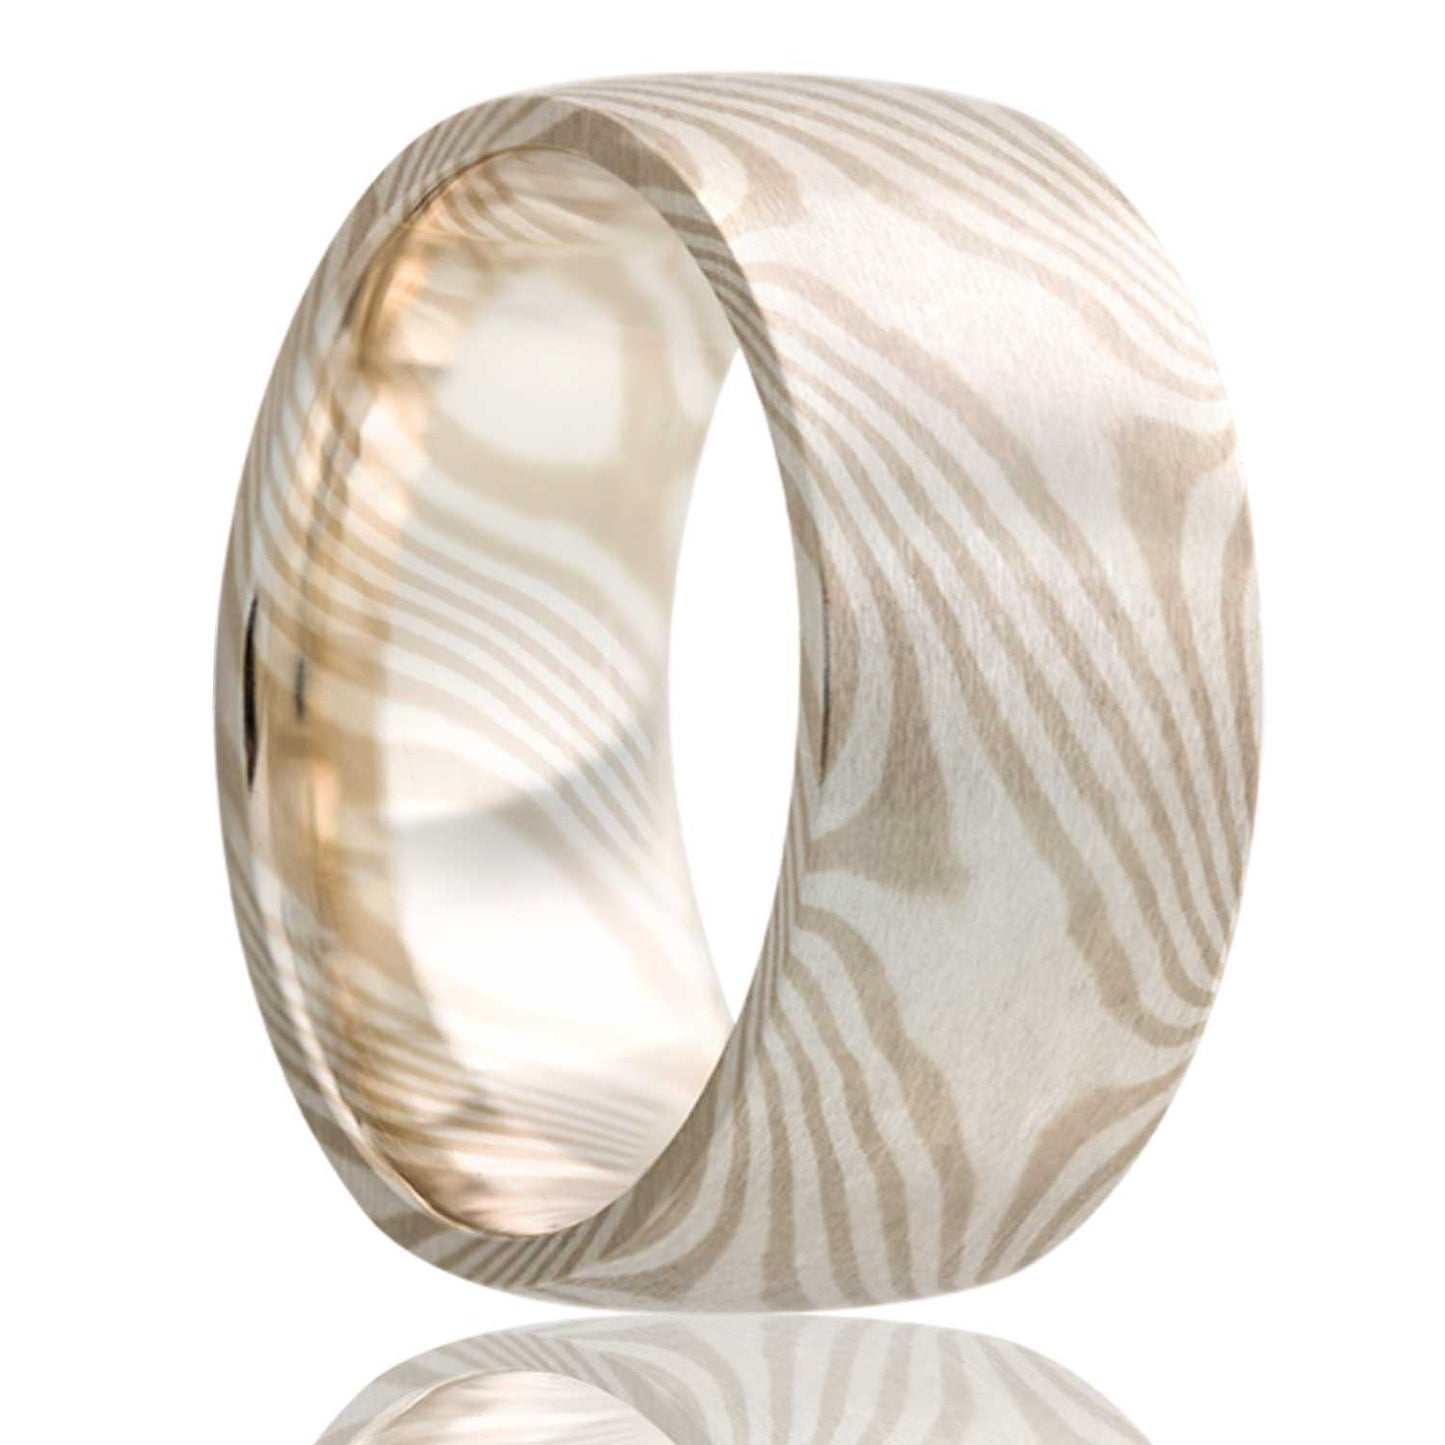 A 14k white gold & sterling silver mokume gane domed wedding band displayed on a neutral white background.